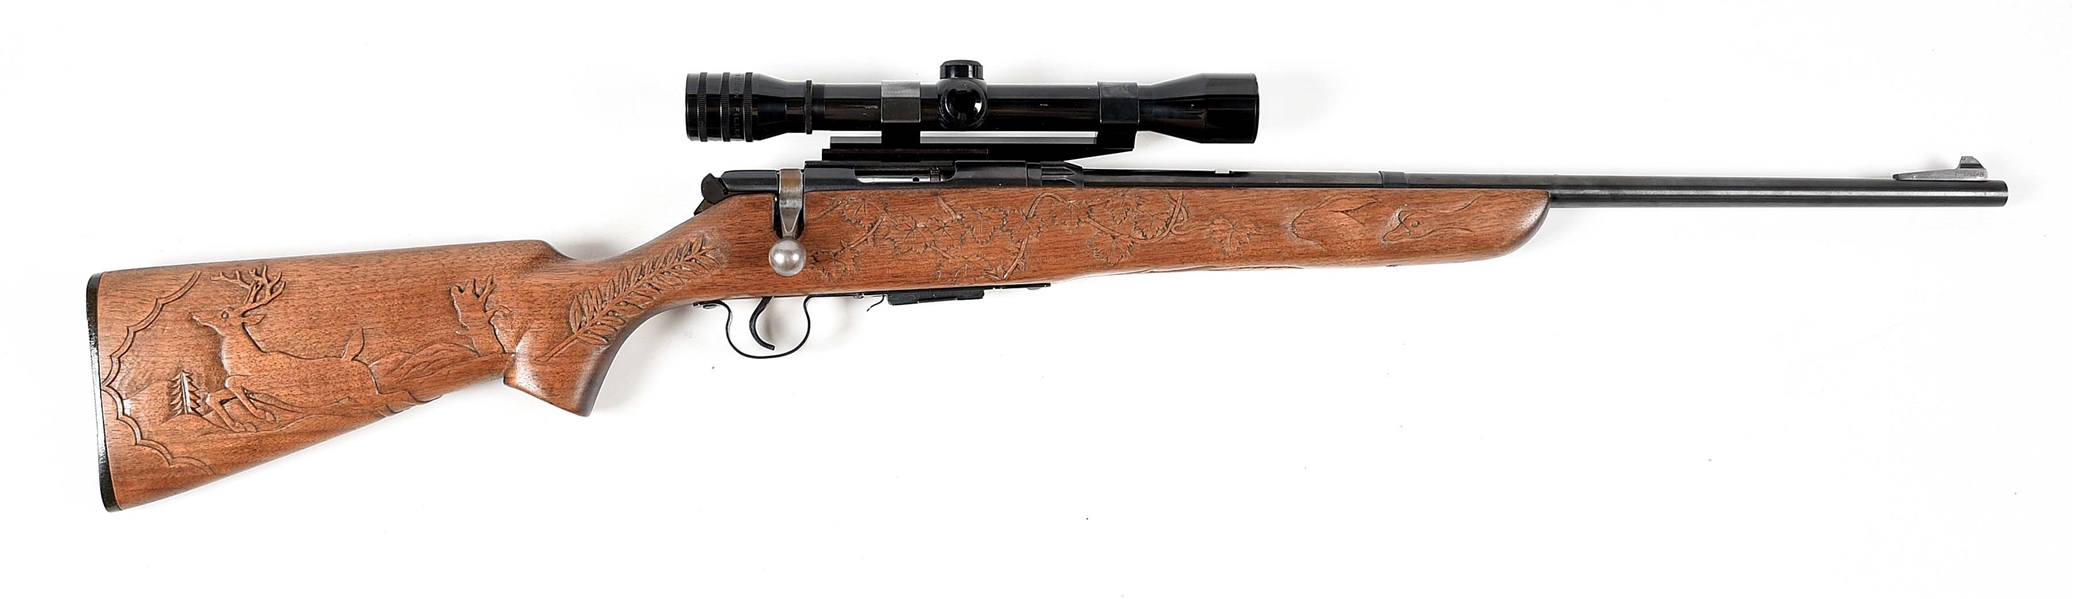 (C) SCOPED SAVAGE 342 .22 HORNET BOLT ACTION RIFLE WITH CUSTOM CARVED STOCK.